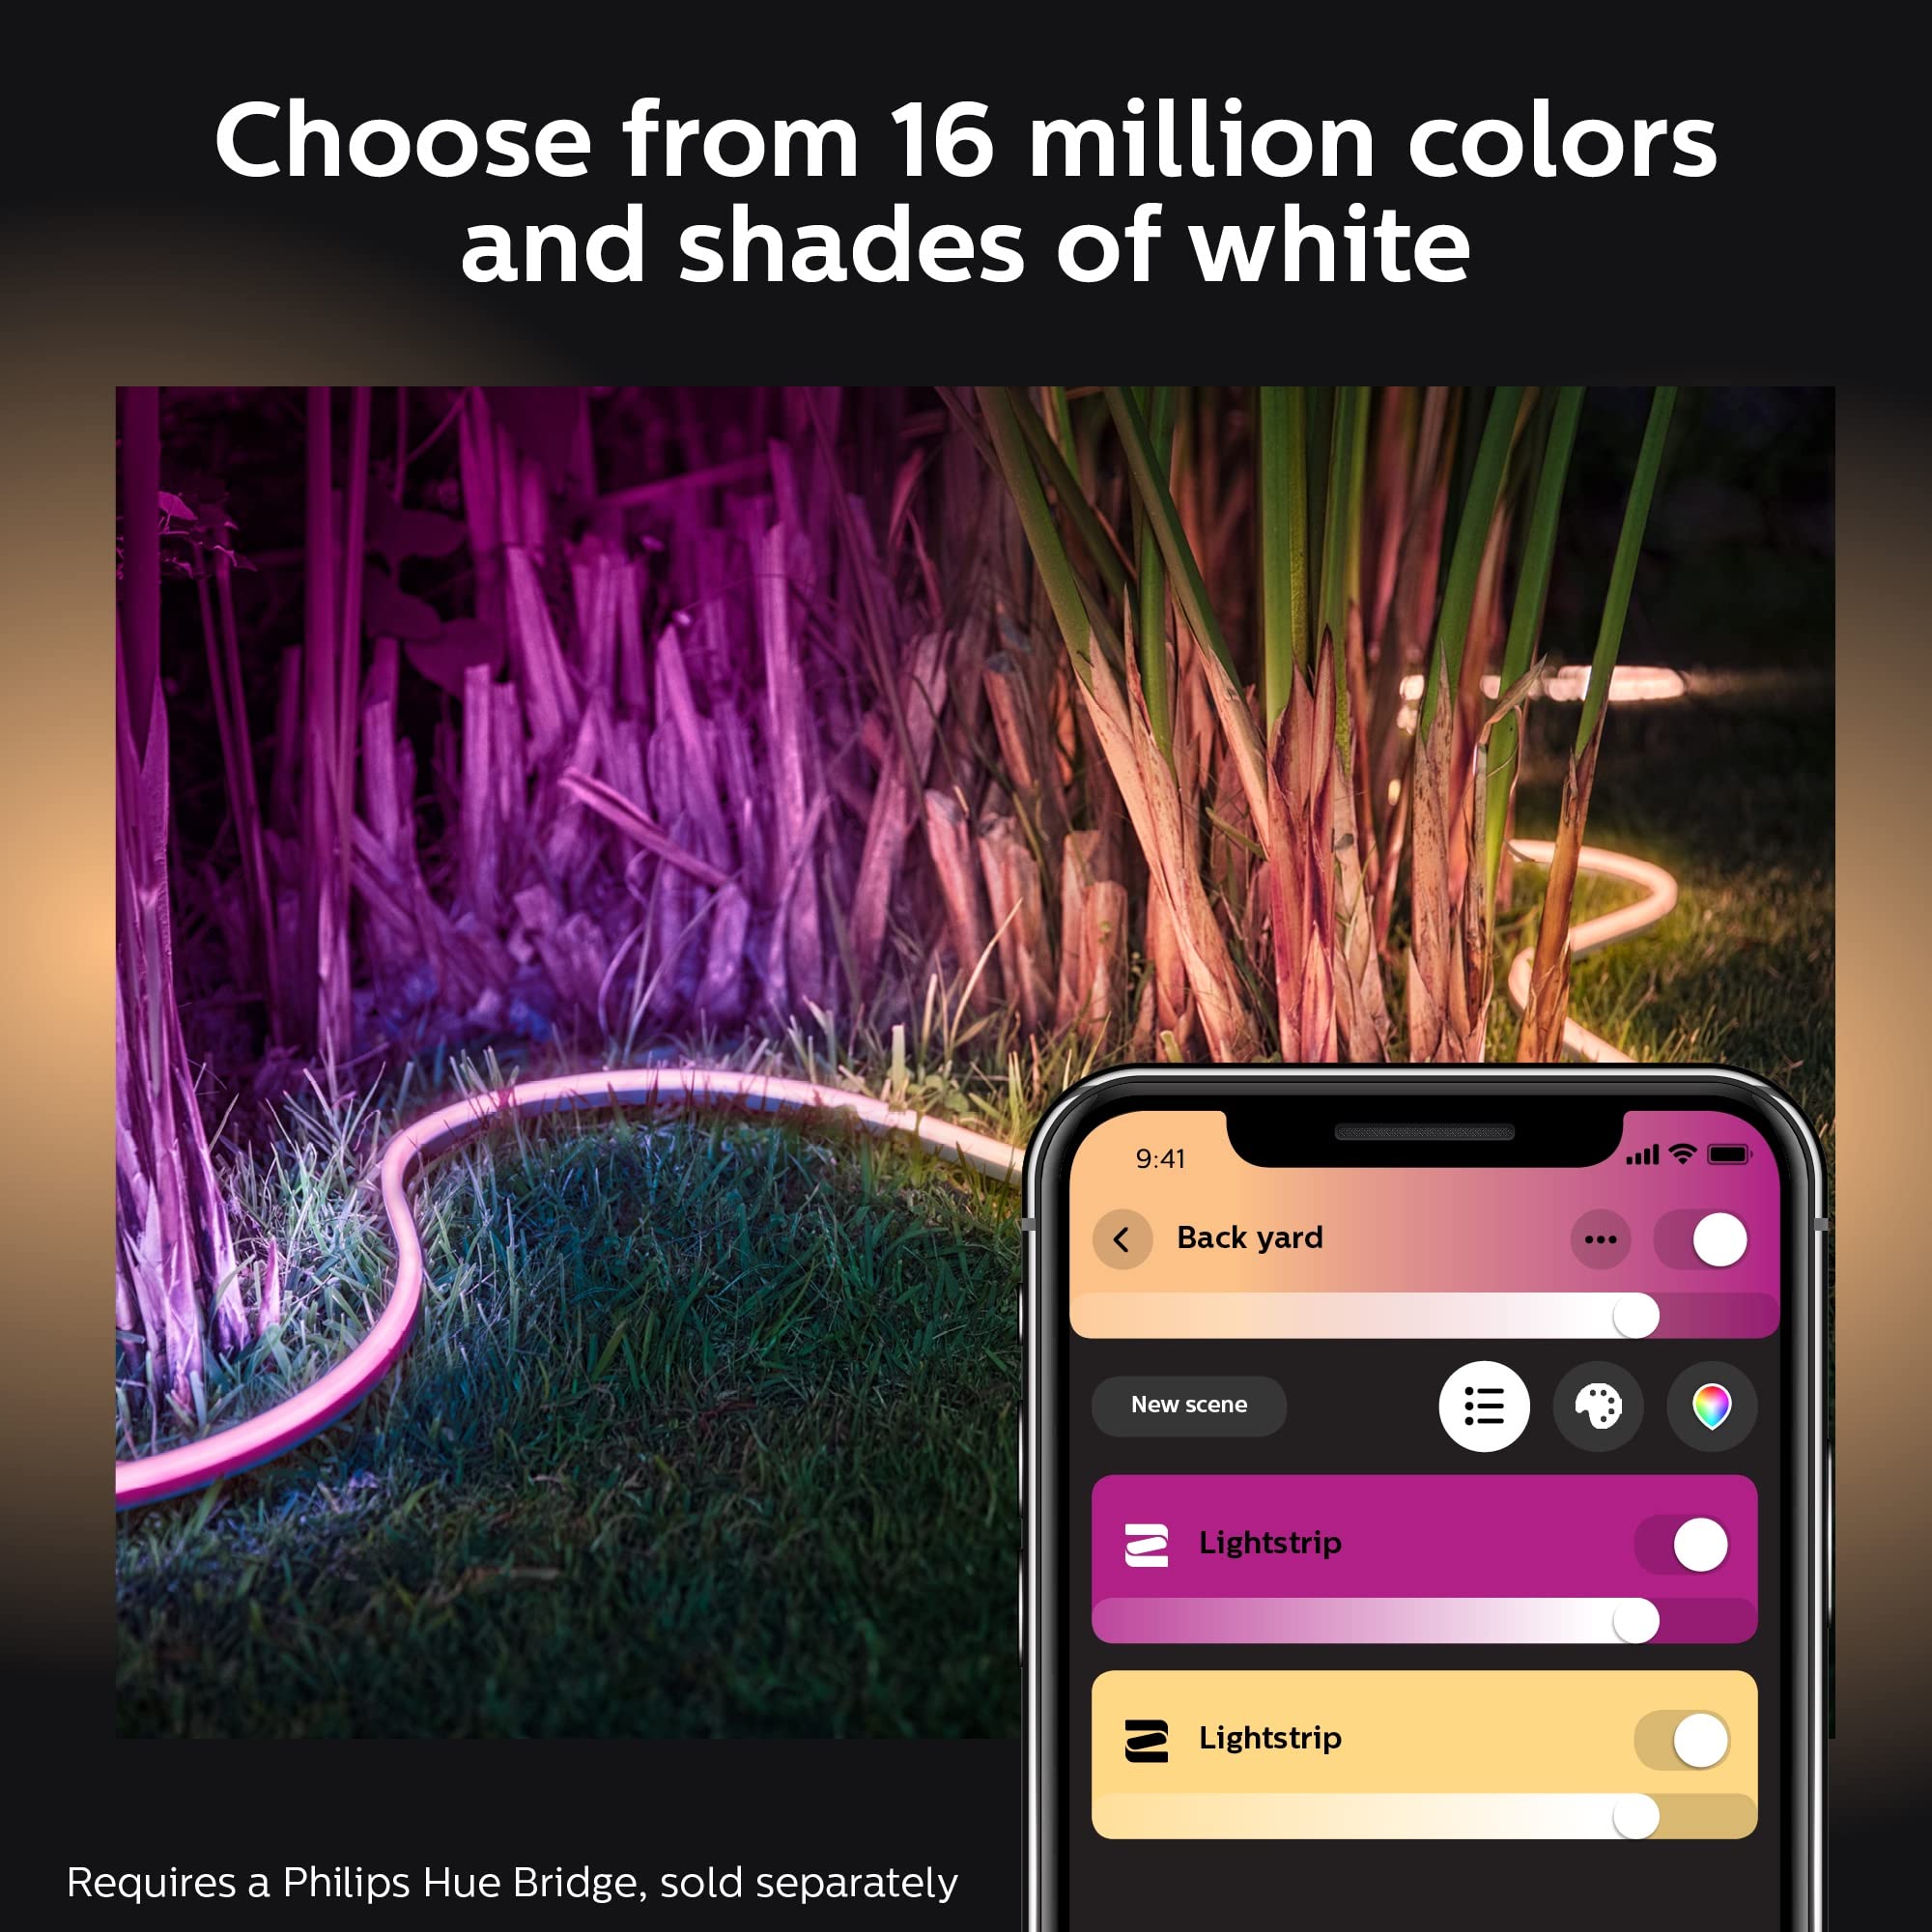 Philips Hue White and Color Ambiance 7 Foot Outdoor Light Strip - Includes 1 Light Strip and 1 Power Supply 40W - Requires Hue Bridge - Works with Amazon Alexa, Apple HomeKit and Google Assistant